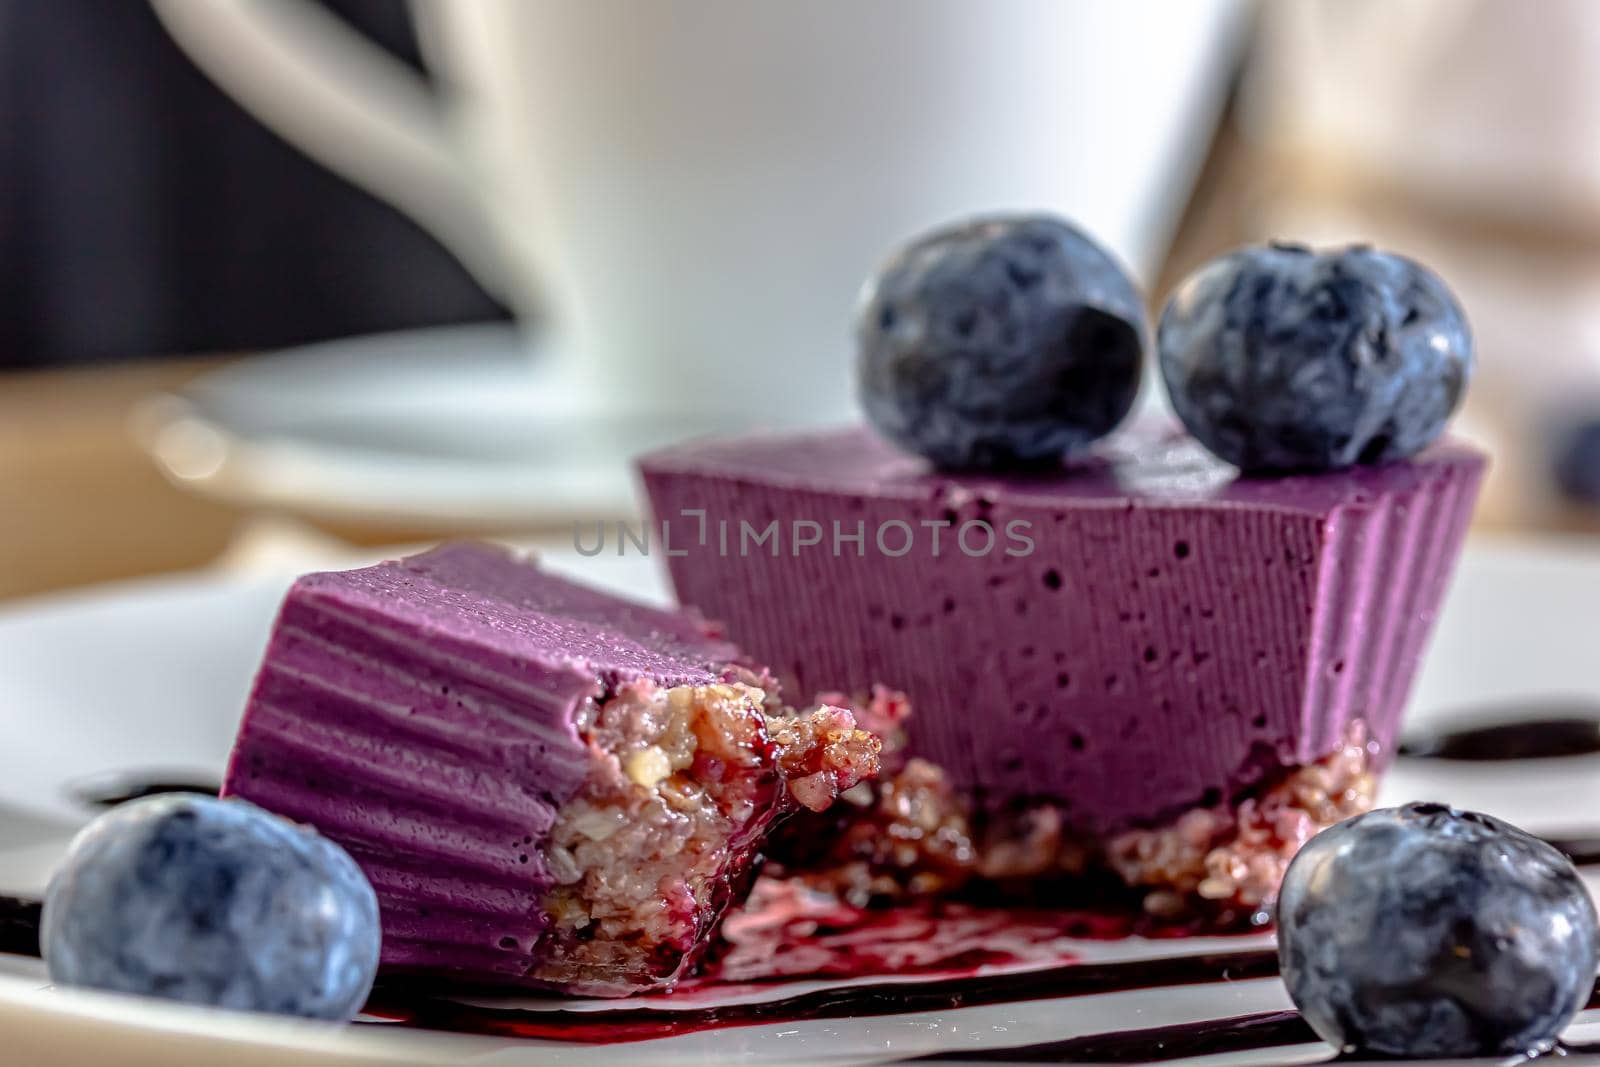 Delicious cake with blackberry-blueberry mousse. Closeup view by Milanchikov